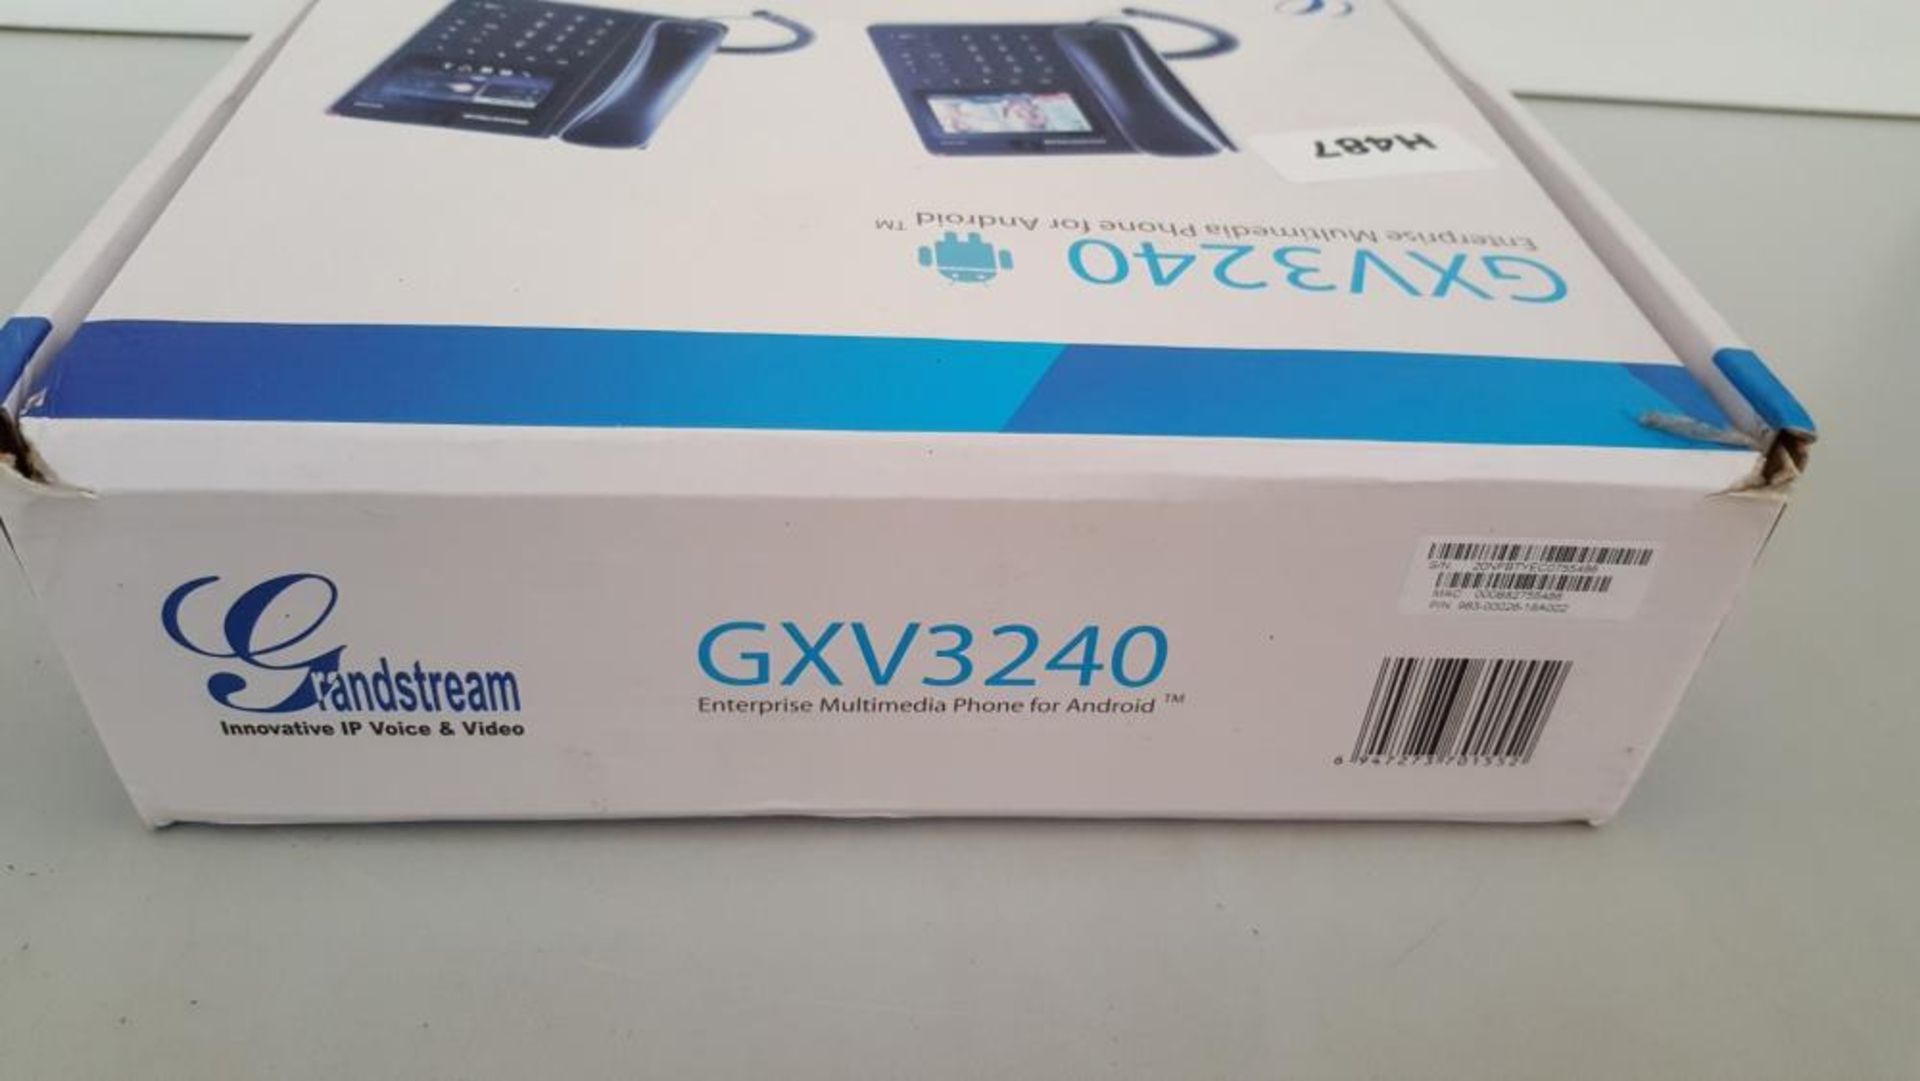 1 x Grandstream GXV3240 Multimedia IP Phone for Android - Ref H487 - CL011 - Location: Altrincham WA - Image 2 of 4